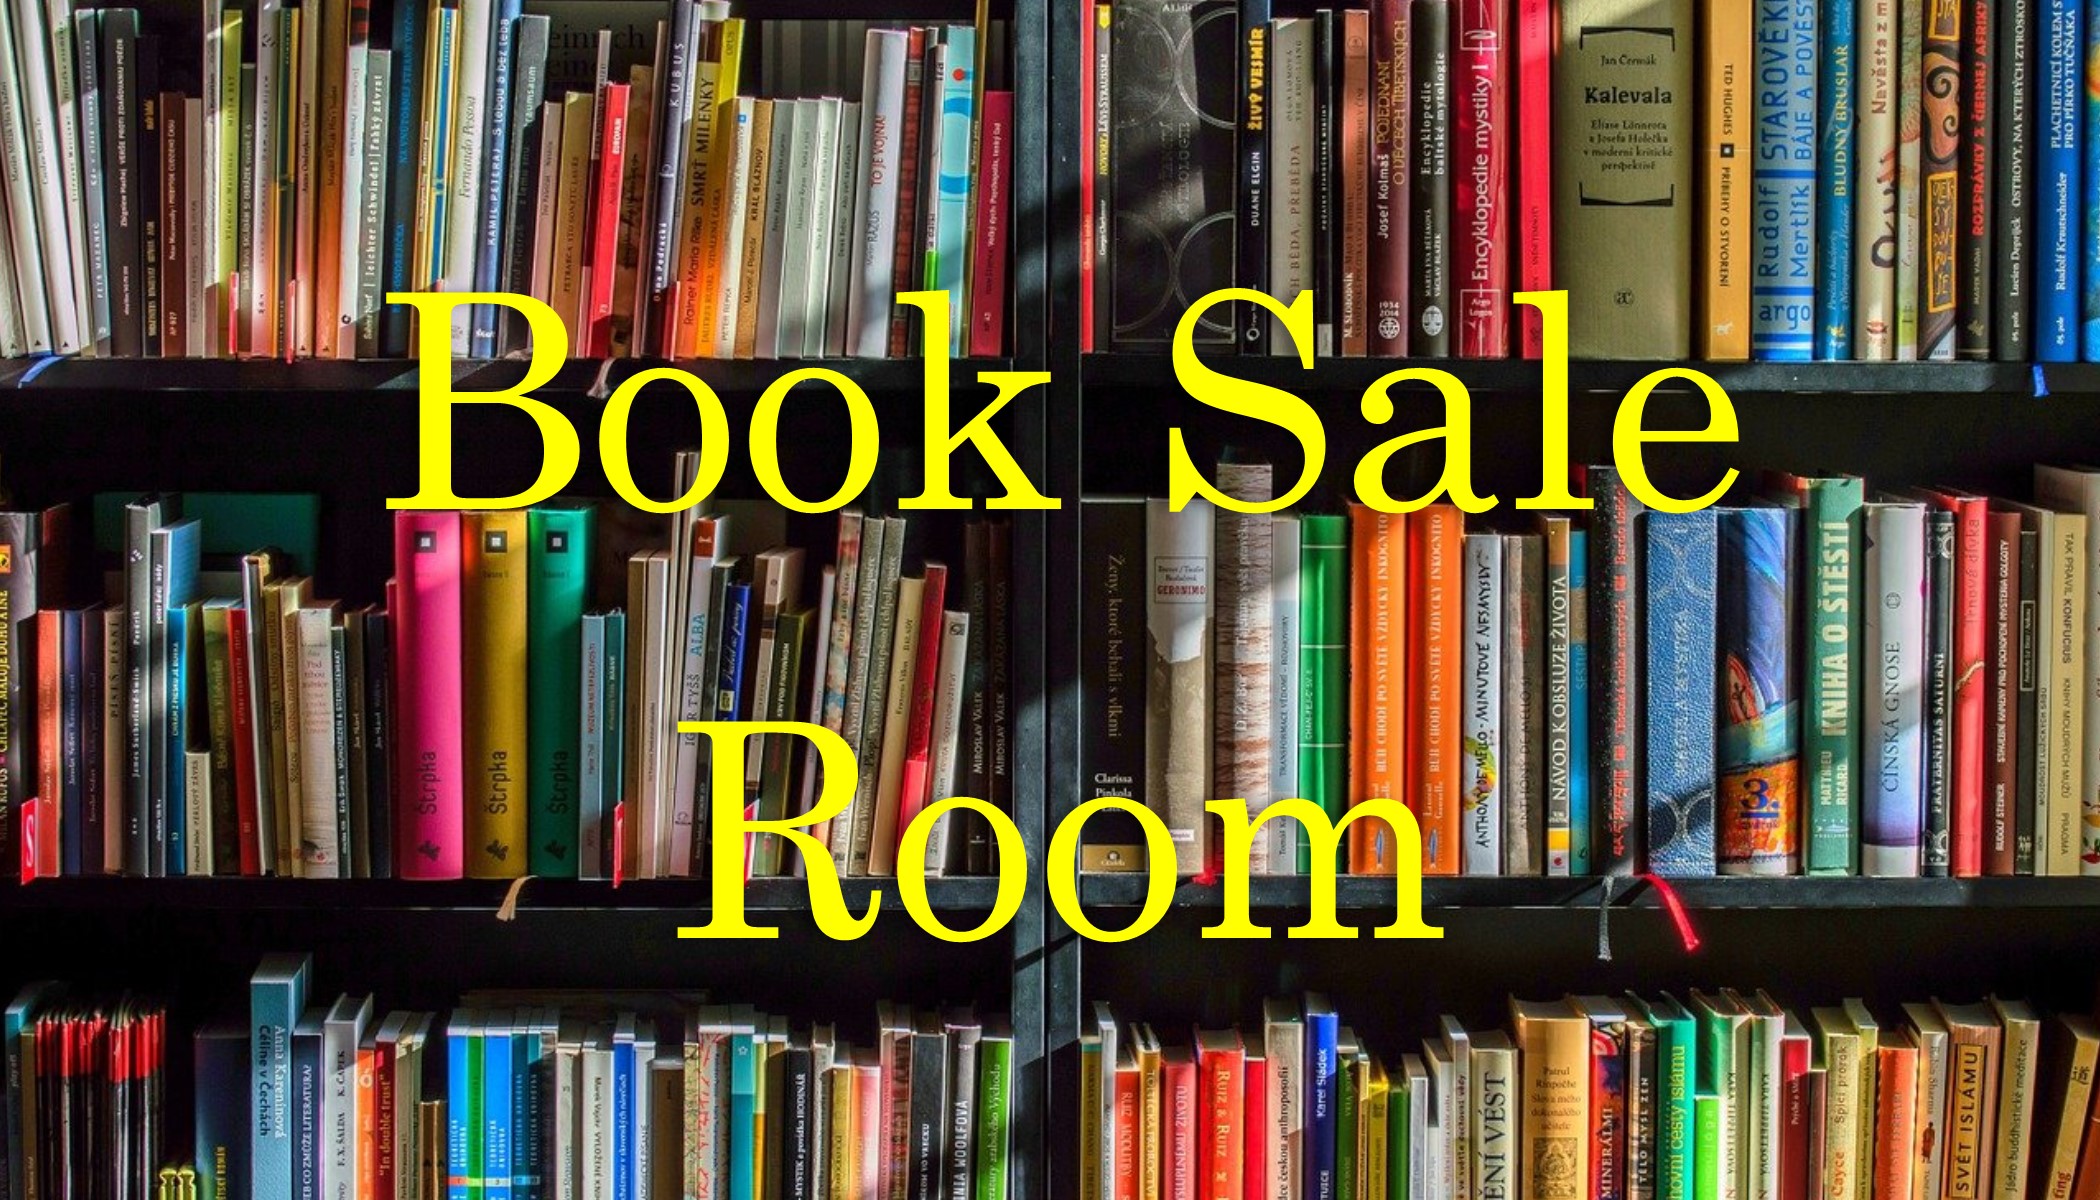 Book Sale Room is open 10 am to 1 pm